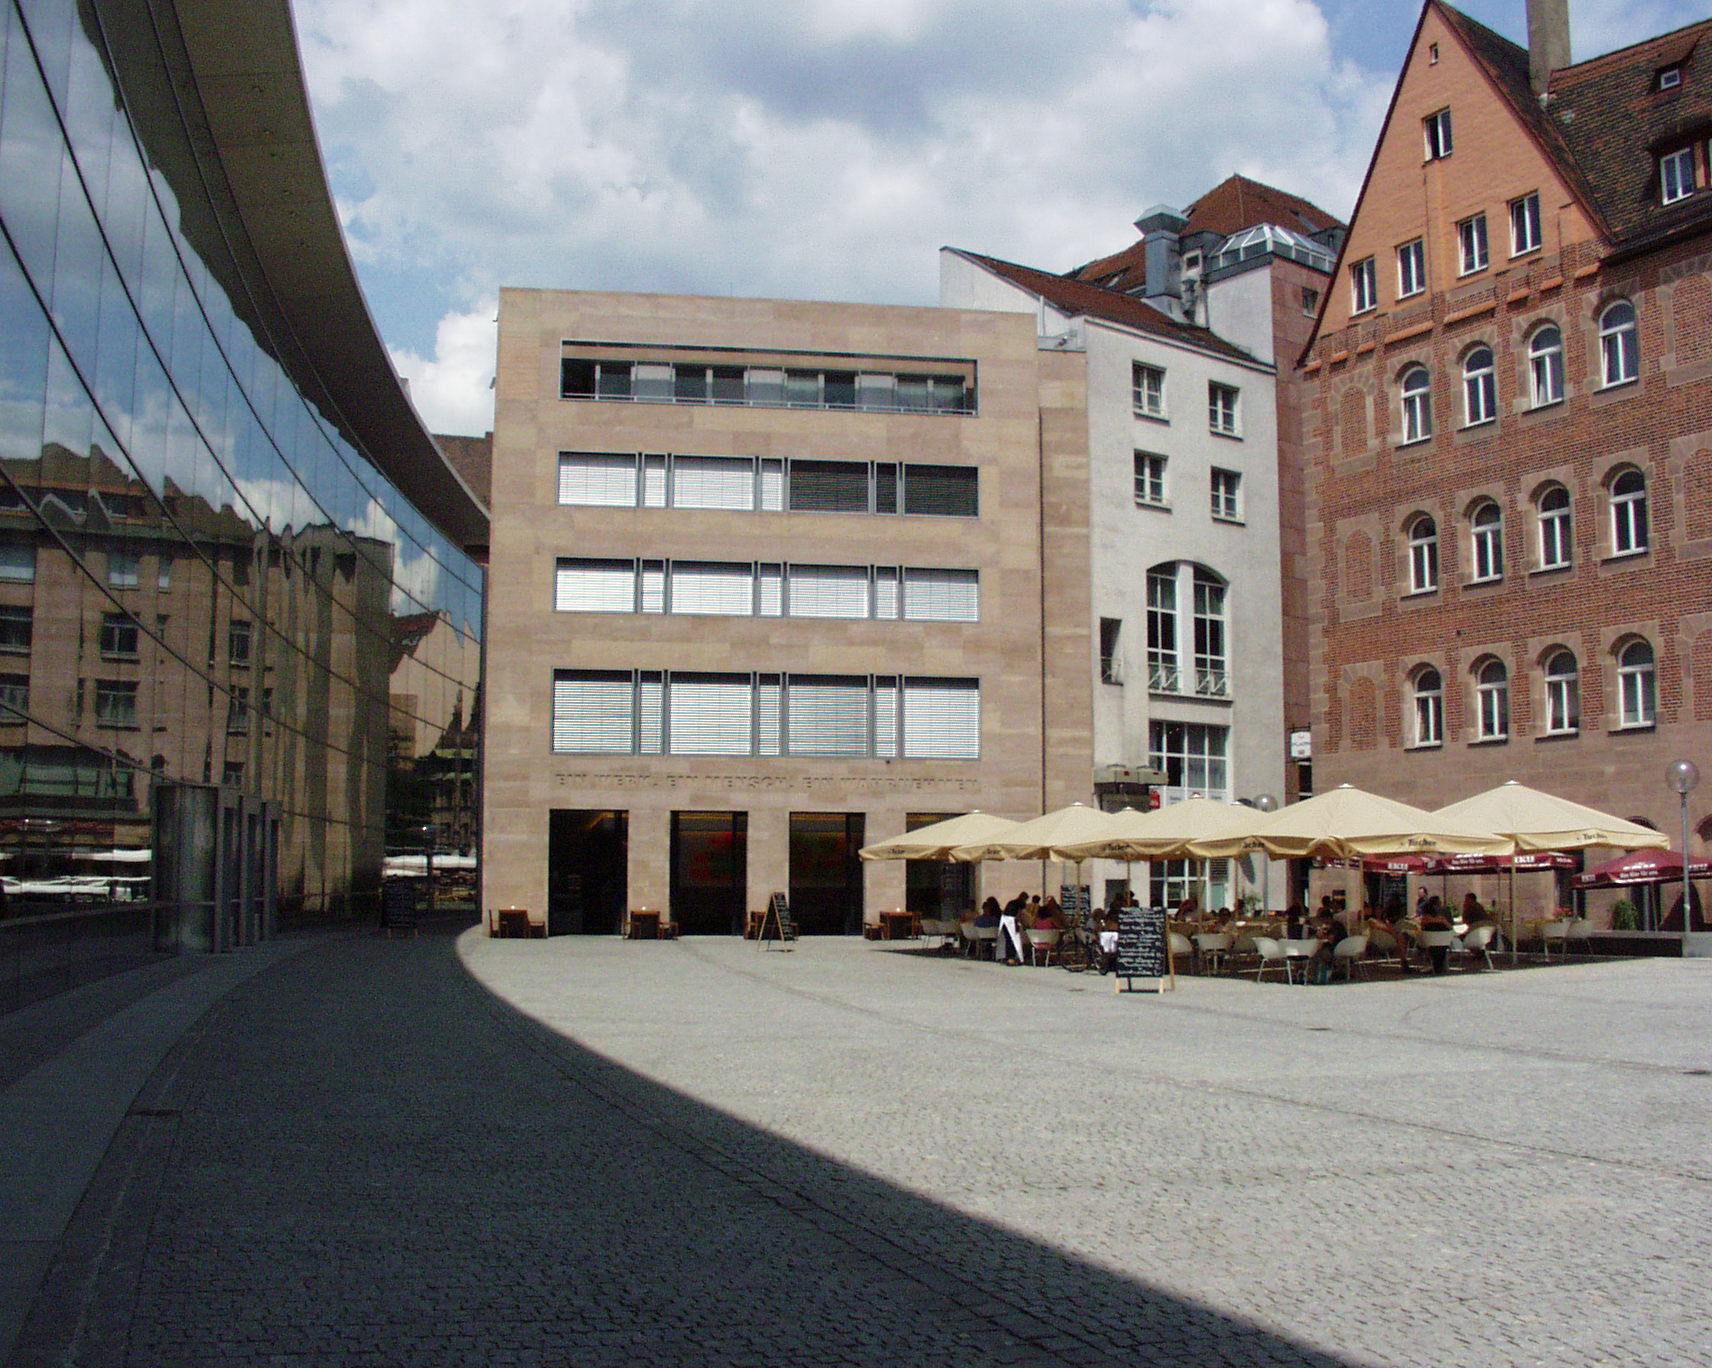 Exterior view of Neues Museum Nuremberg by day: Klarissenplatz with brick building, glass front of the museum on the left, other buildings and sunshades on the right